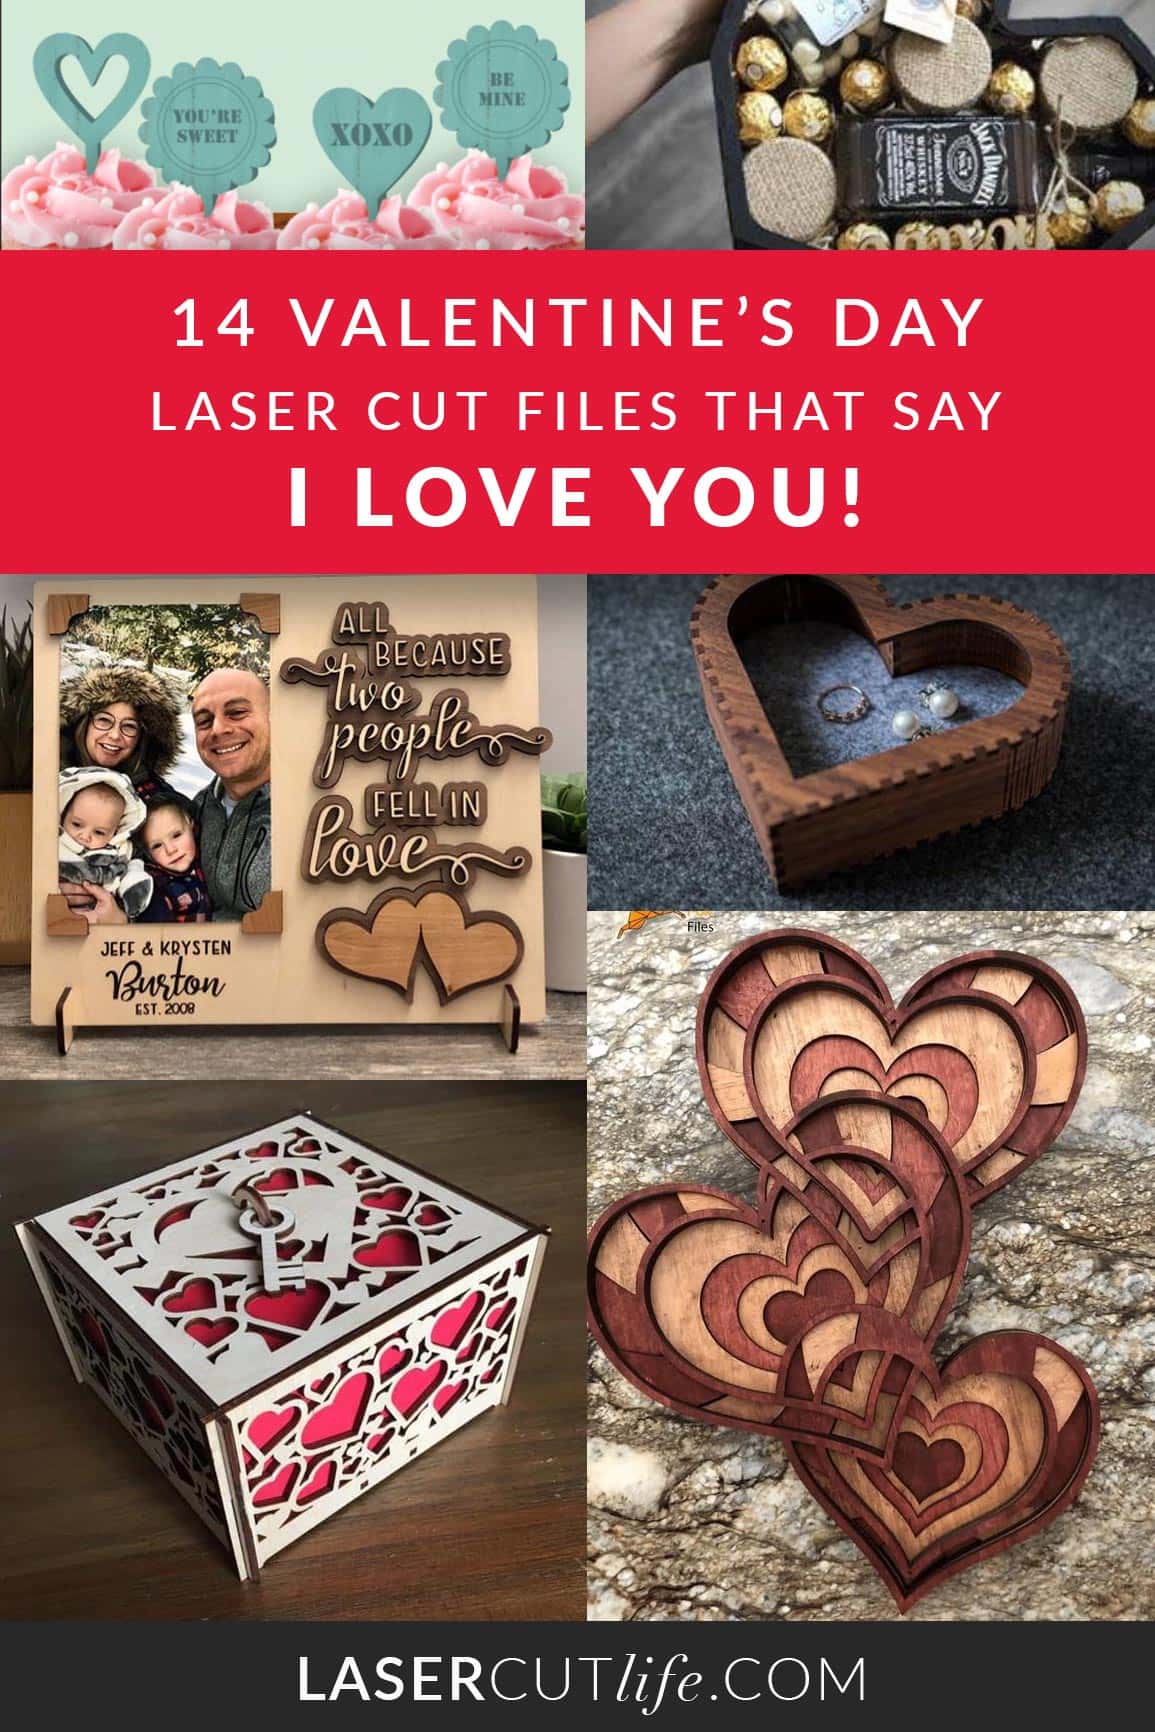 14 Valentine's Day Laser Cut Files that will say I Love You!